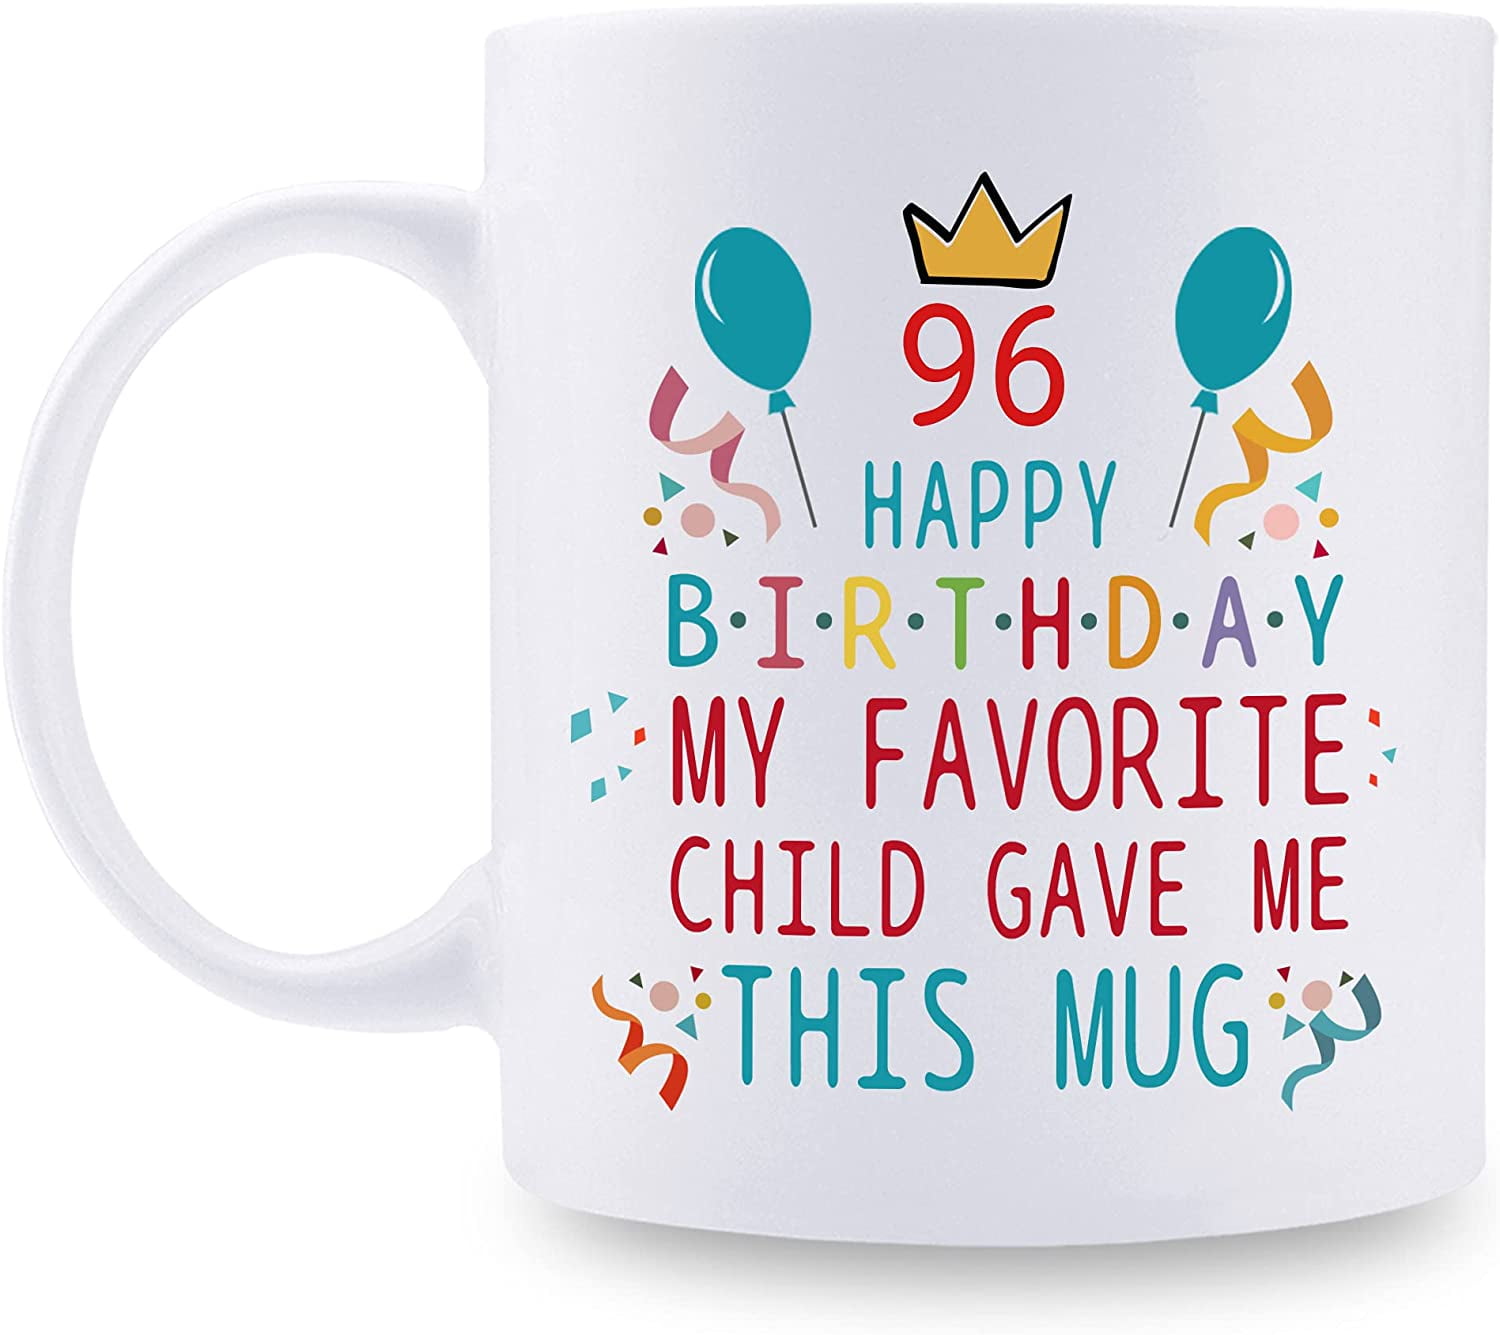 40 Best 50th Birthday Gifts For Mom To Make Her Feel Special – Loveable